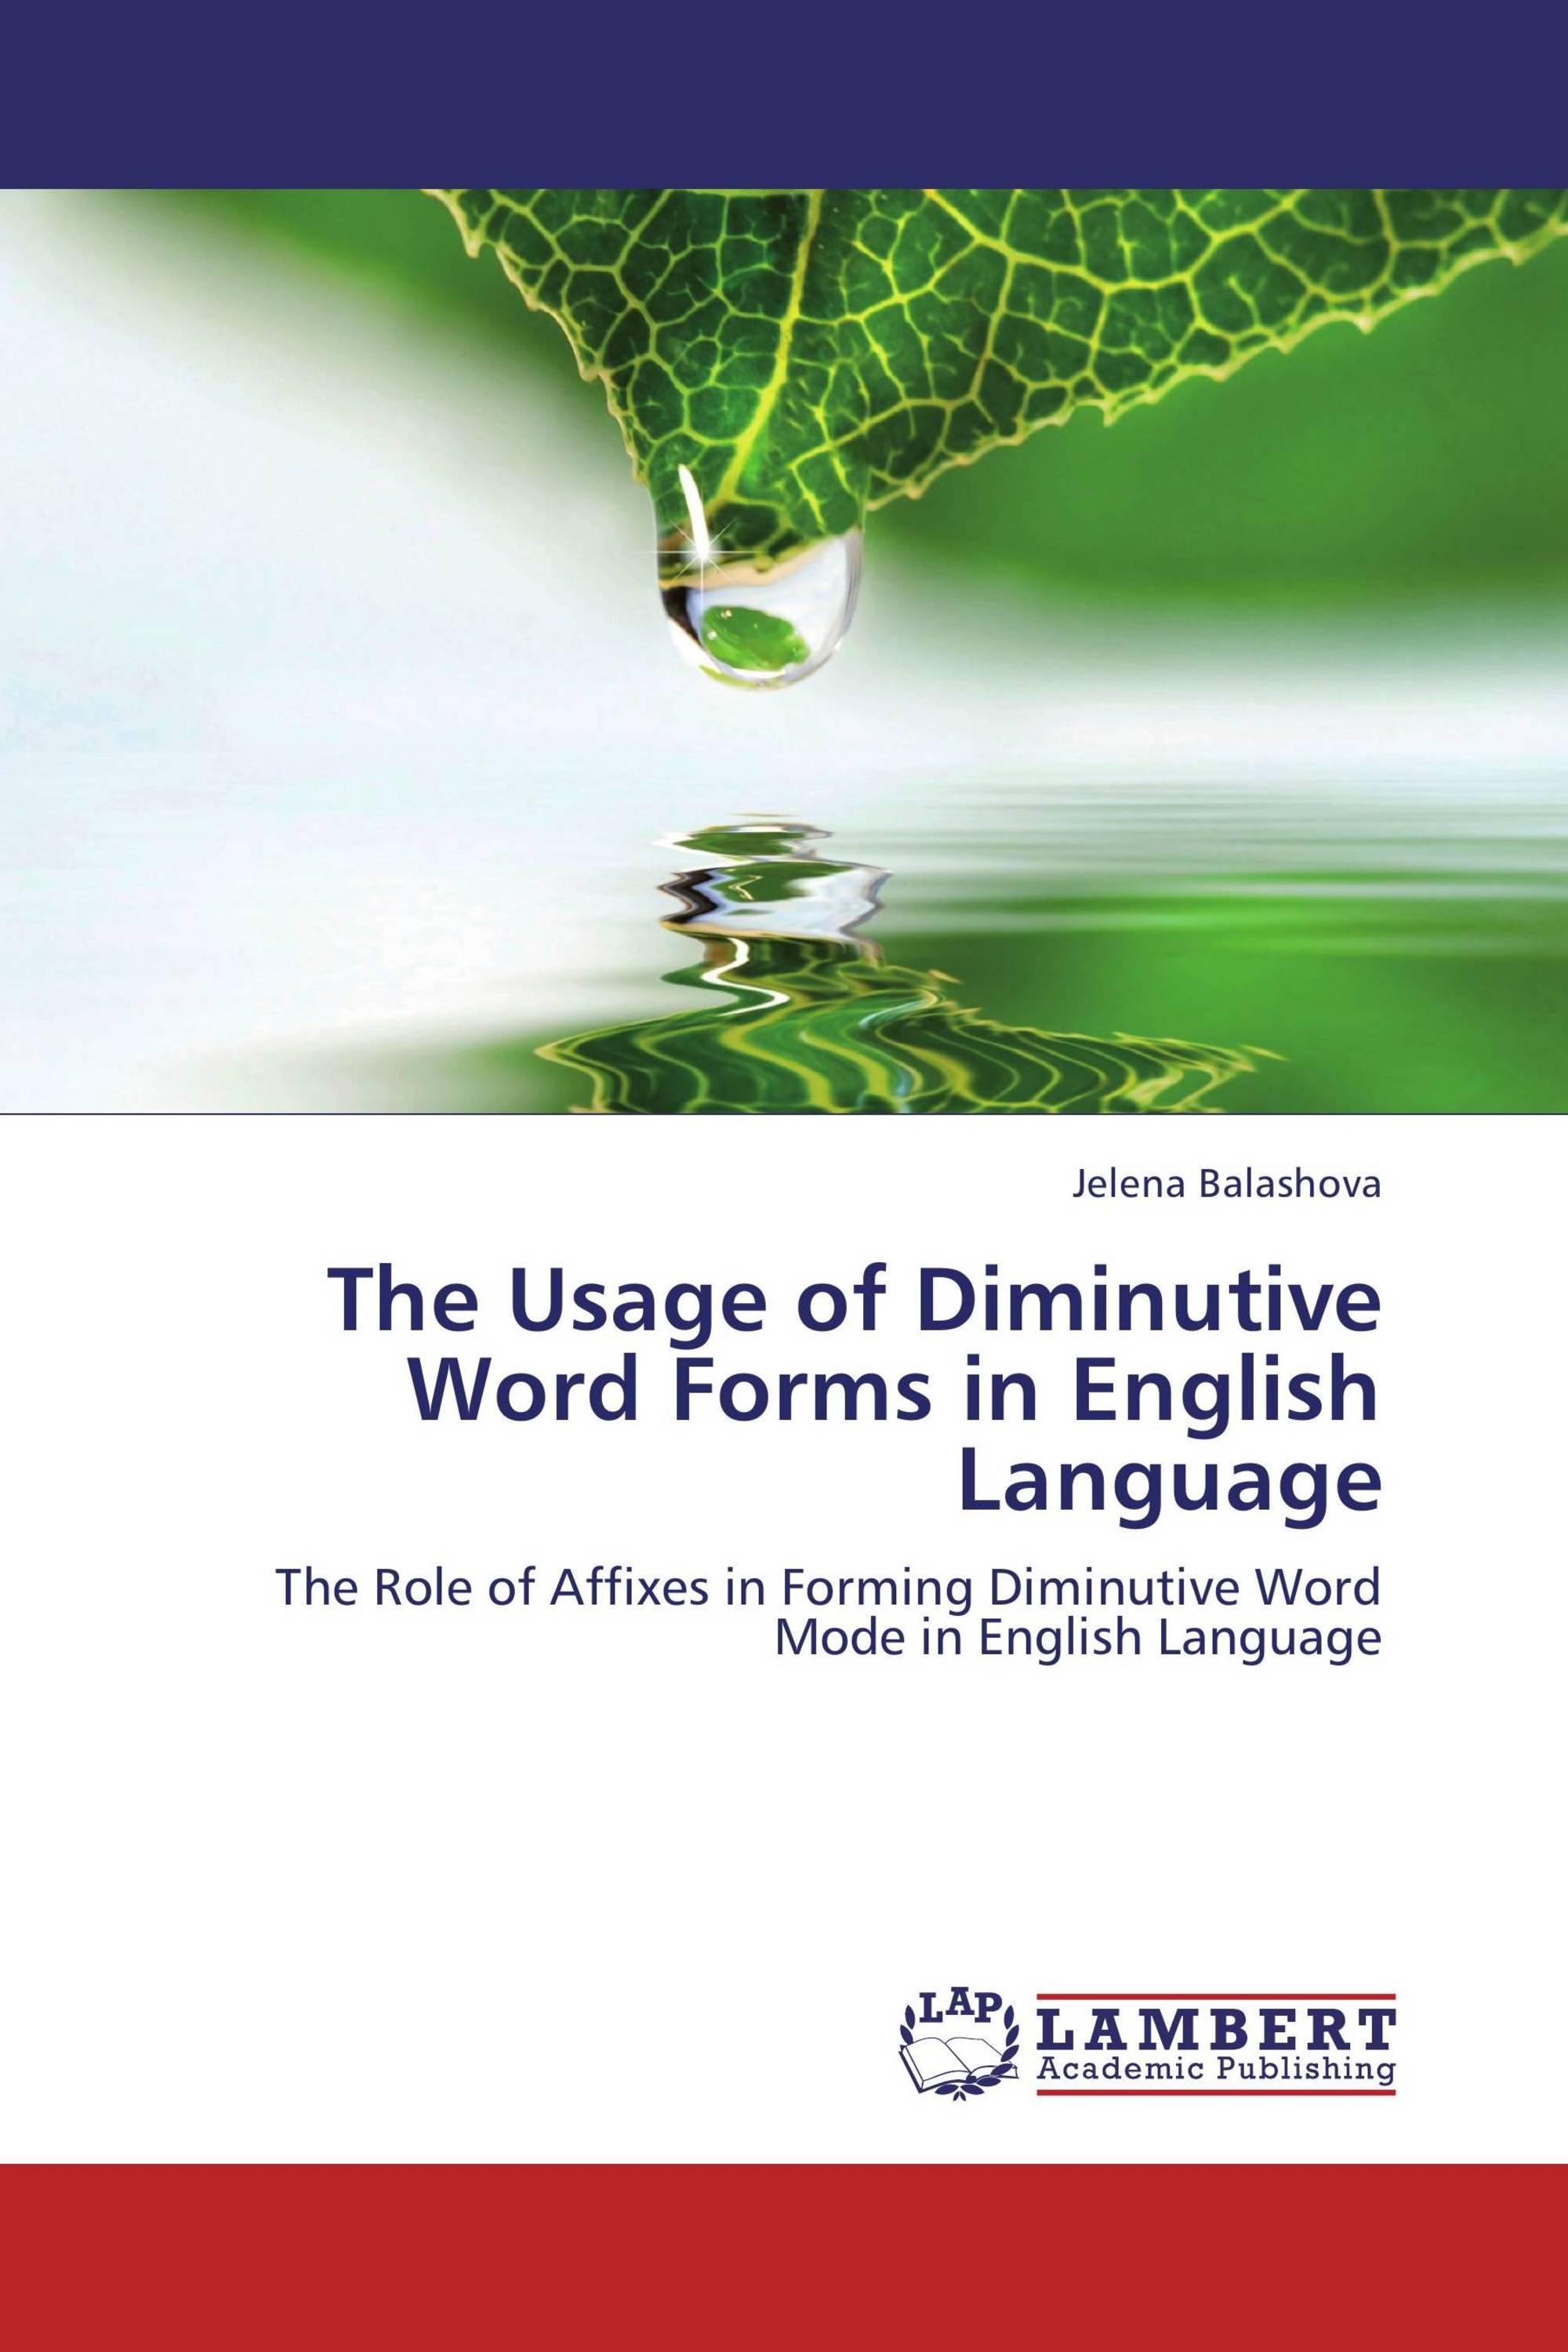 the-usage-of-diminutive-word-forms-in-english-language-978-3-8473